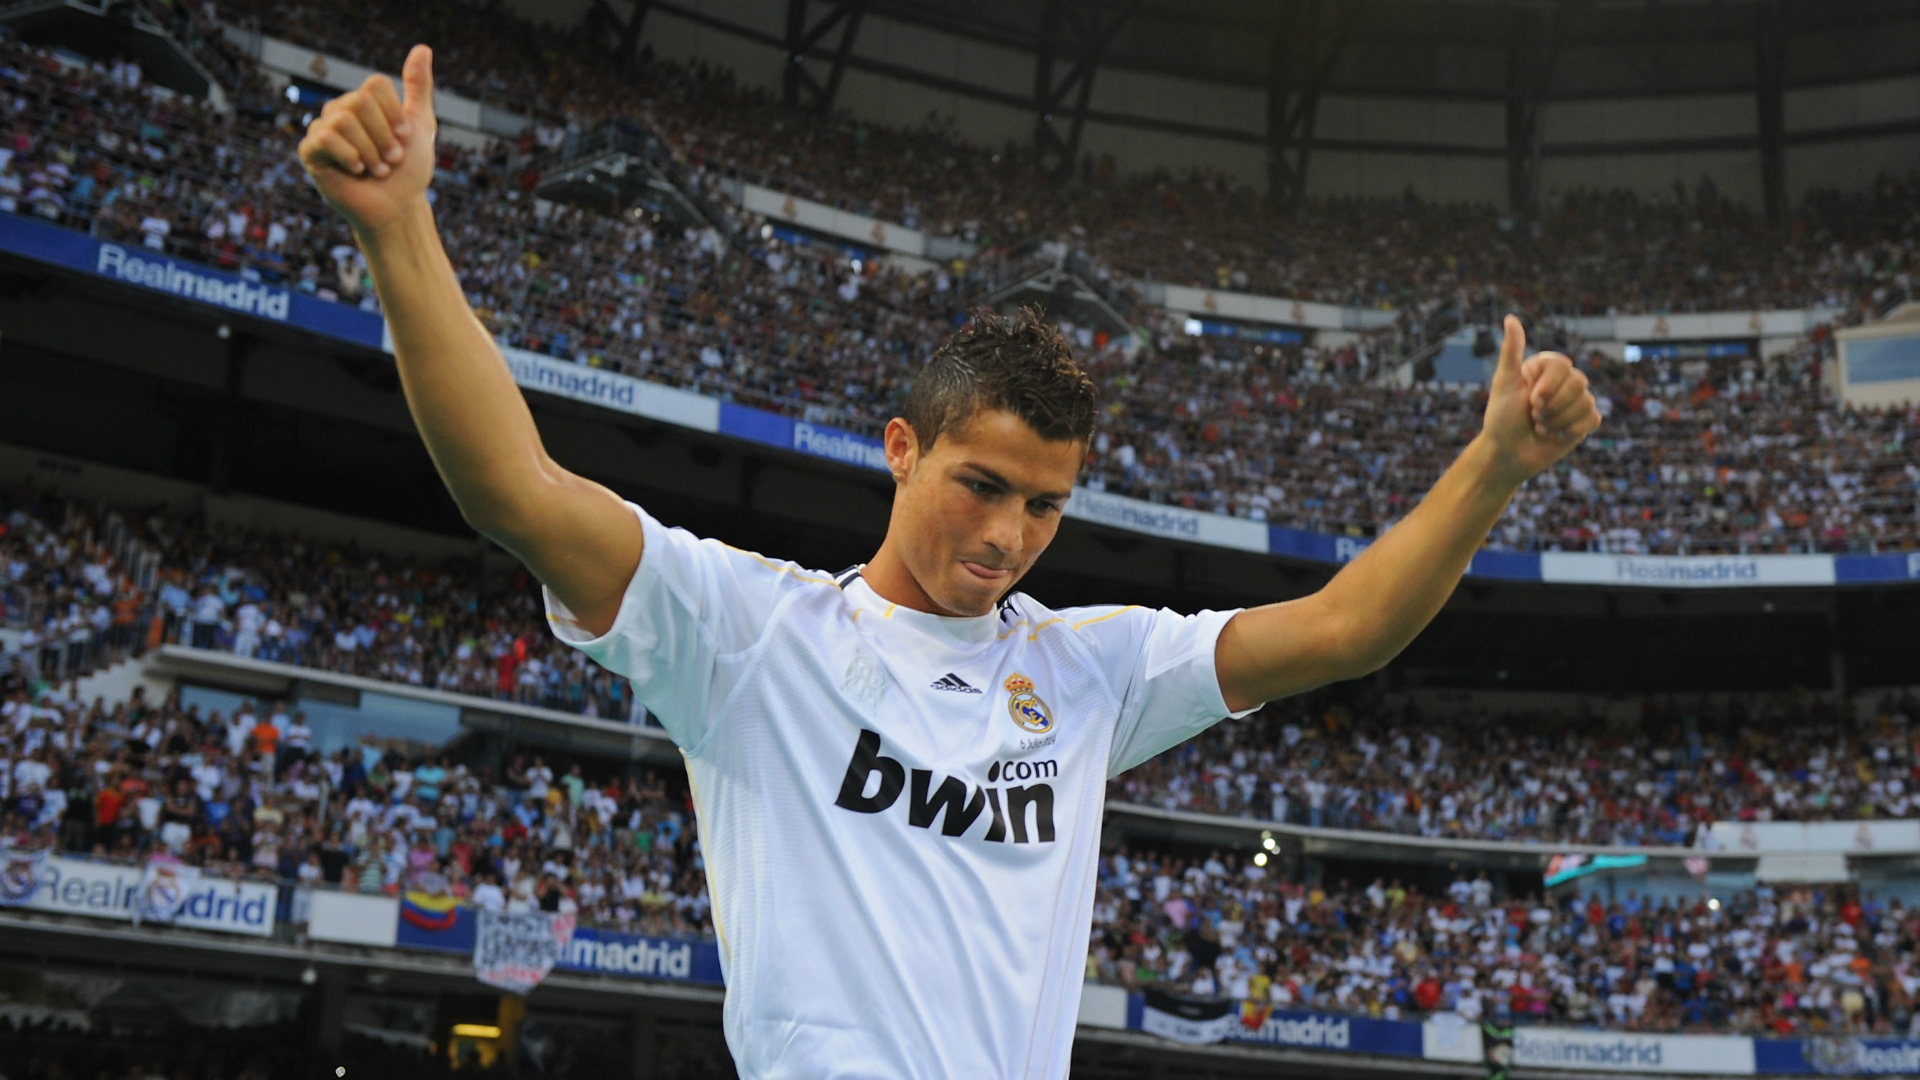 Juventus forward Cristiano Ronaldo "does not agree" with the money being spent on young players in the modern game.